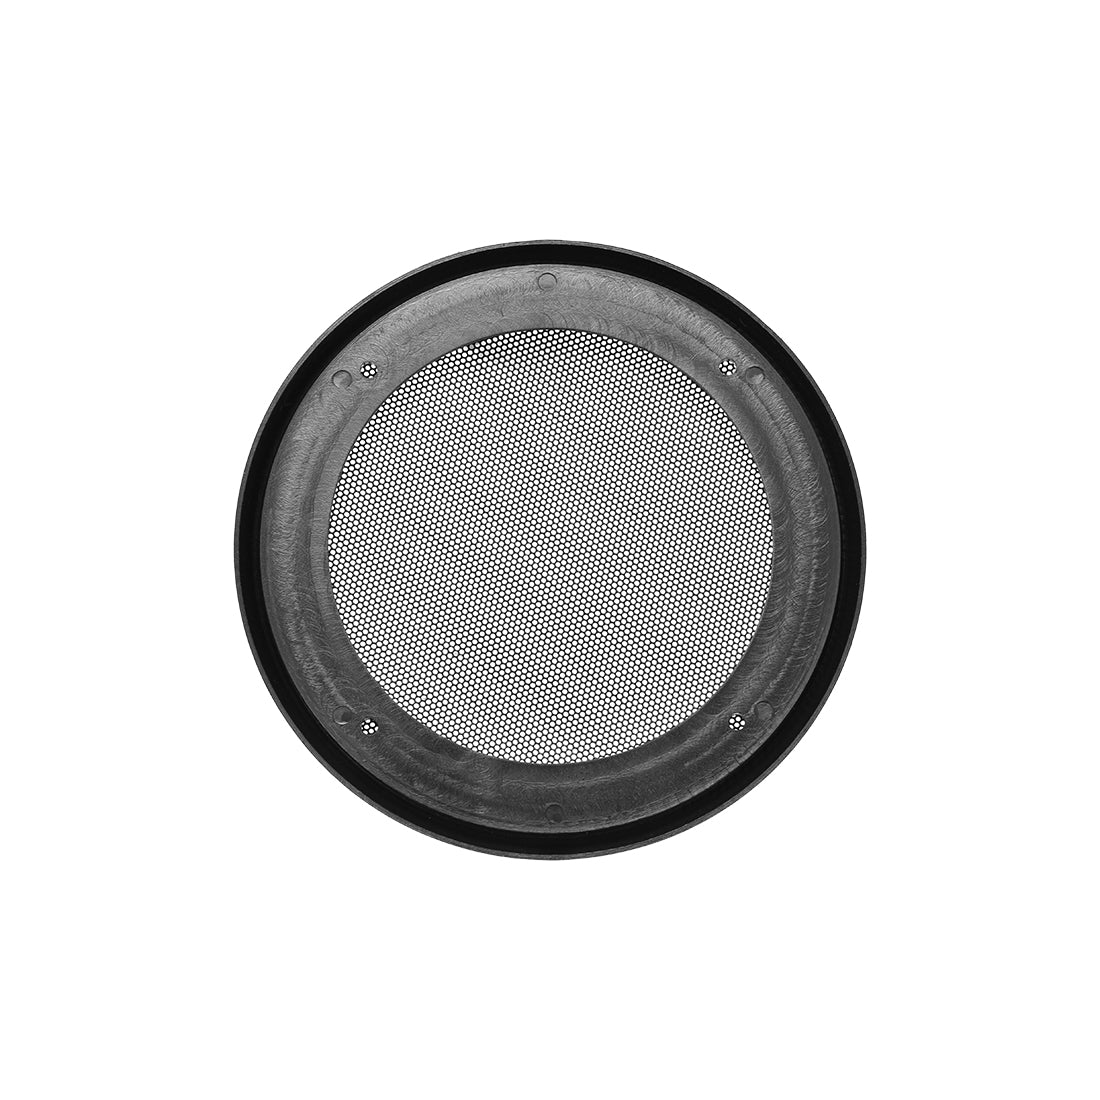 uxcell Uxcell 2pcs 4" Speaker Grill Mesh Decorative Circle Woofer Guard Protector Cover Parts